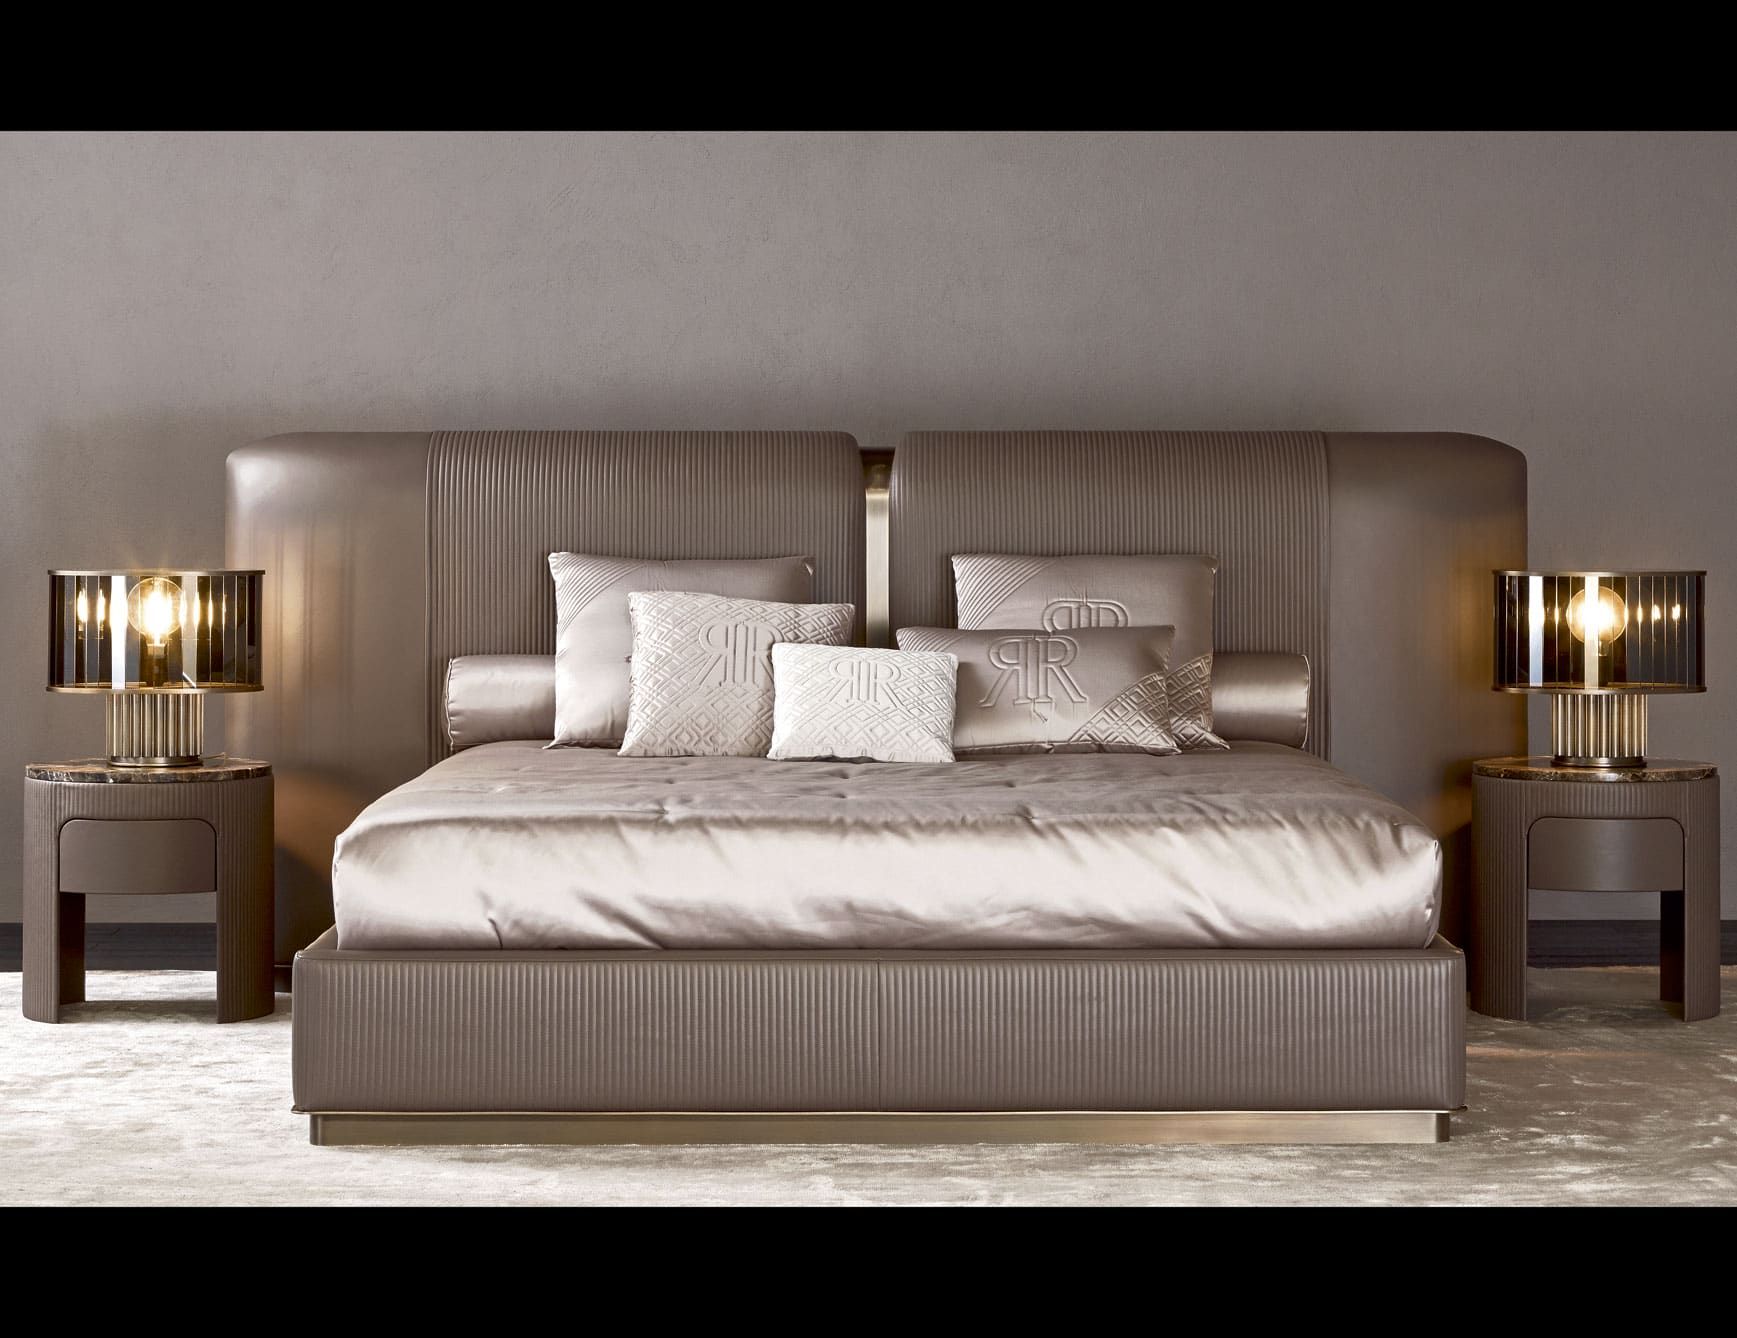 Vogue modern luxury bed with beige leather